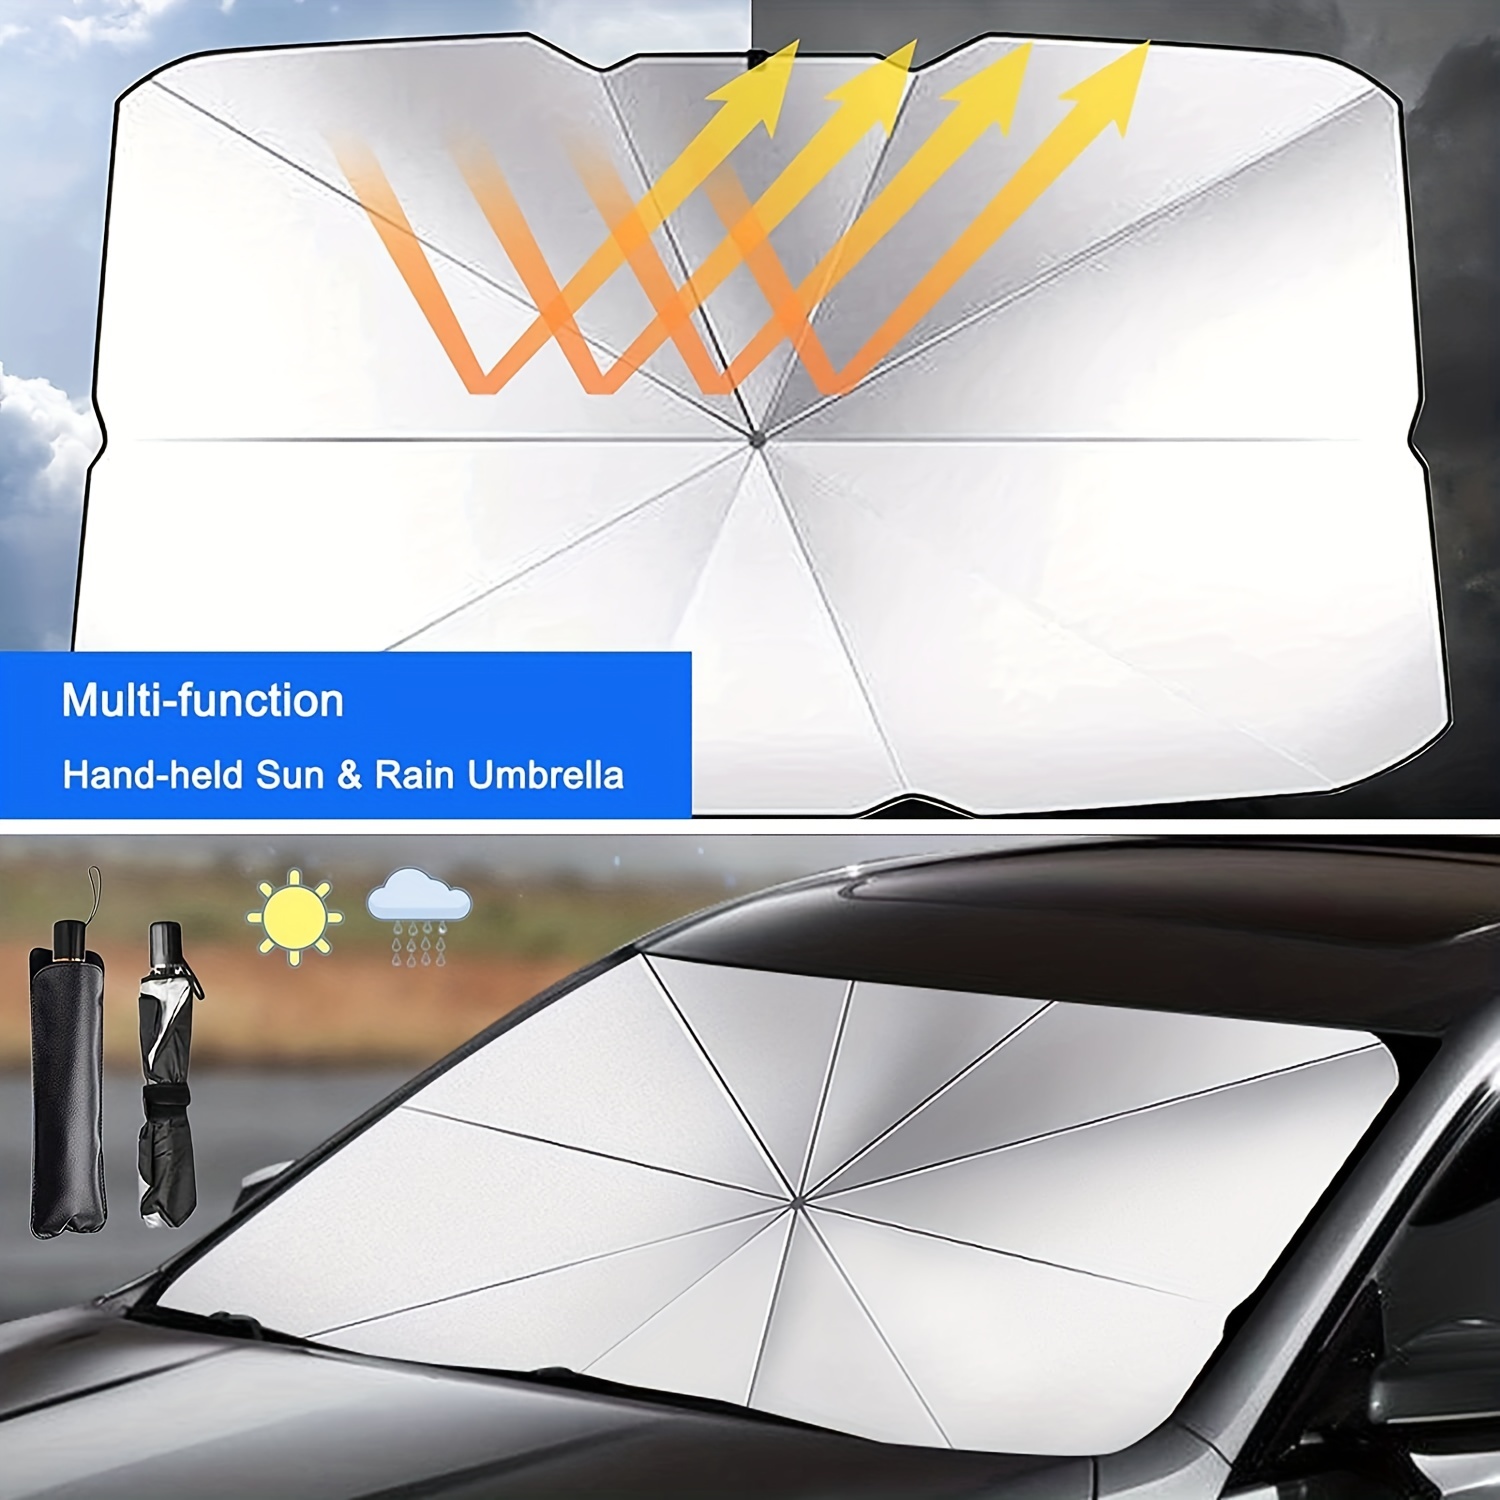 Foldable Vehicle Sunshade 125cm/145cm Windshield Umbrella For Front Window,  Heat & UV Protection Auto Accessories From Pubao, $16.4